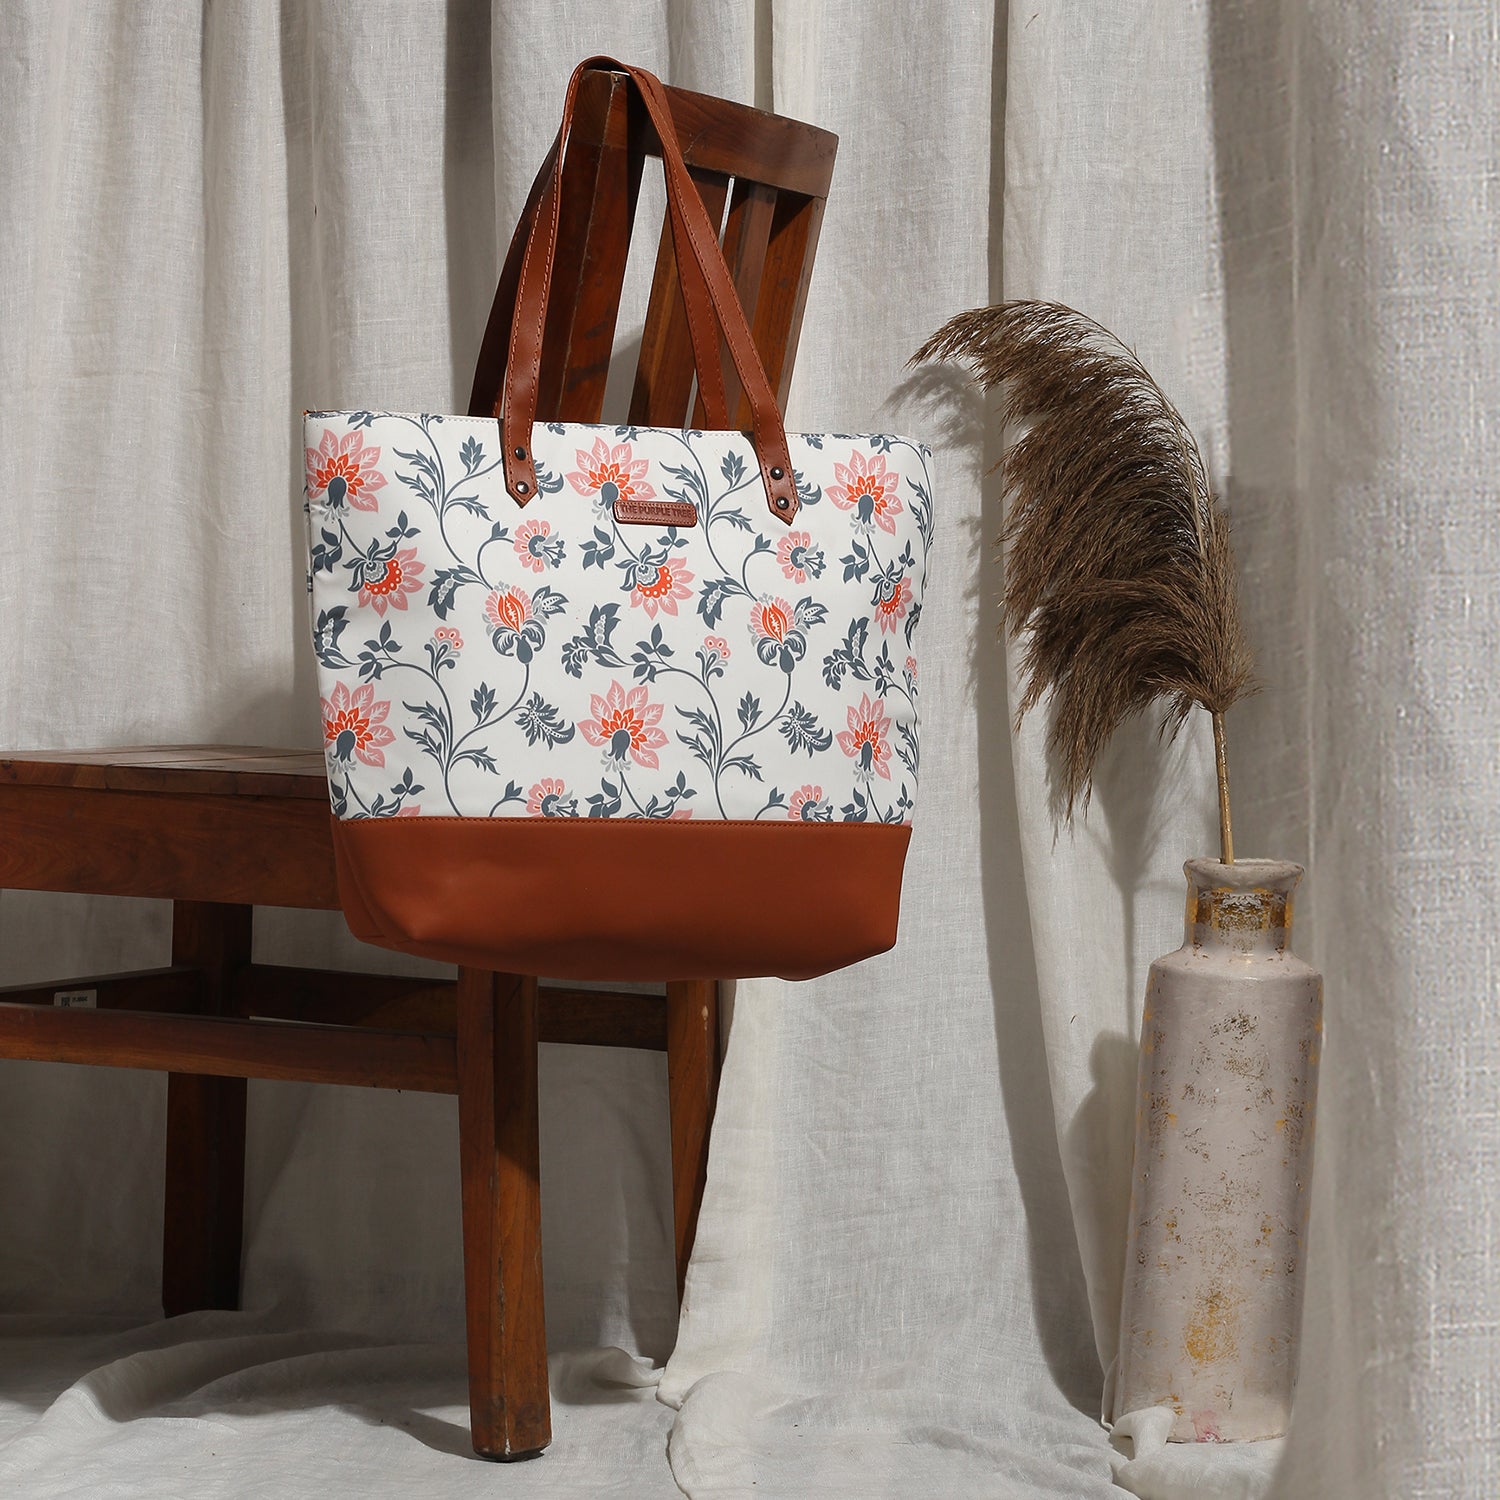 A colorful tote bag with beautiful flowers, resting on a chair. Perfect for adding a touch of nature to your style.